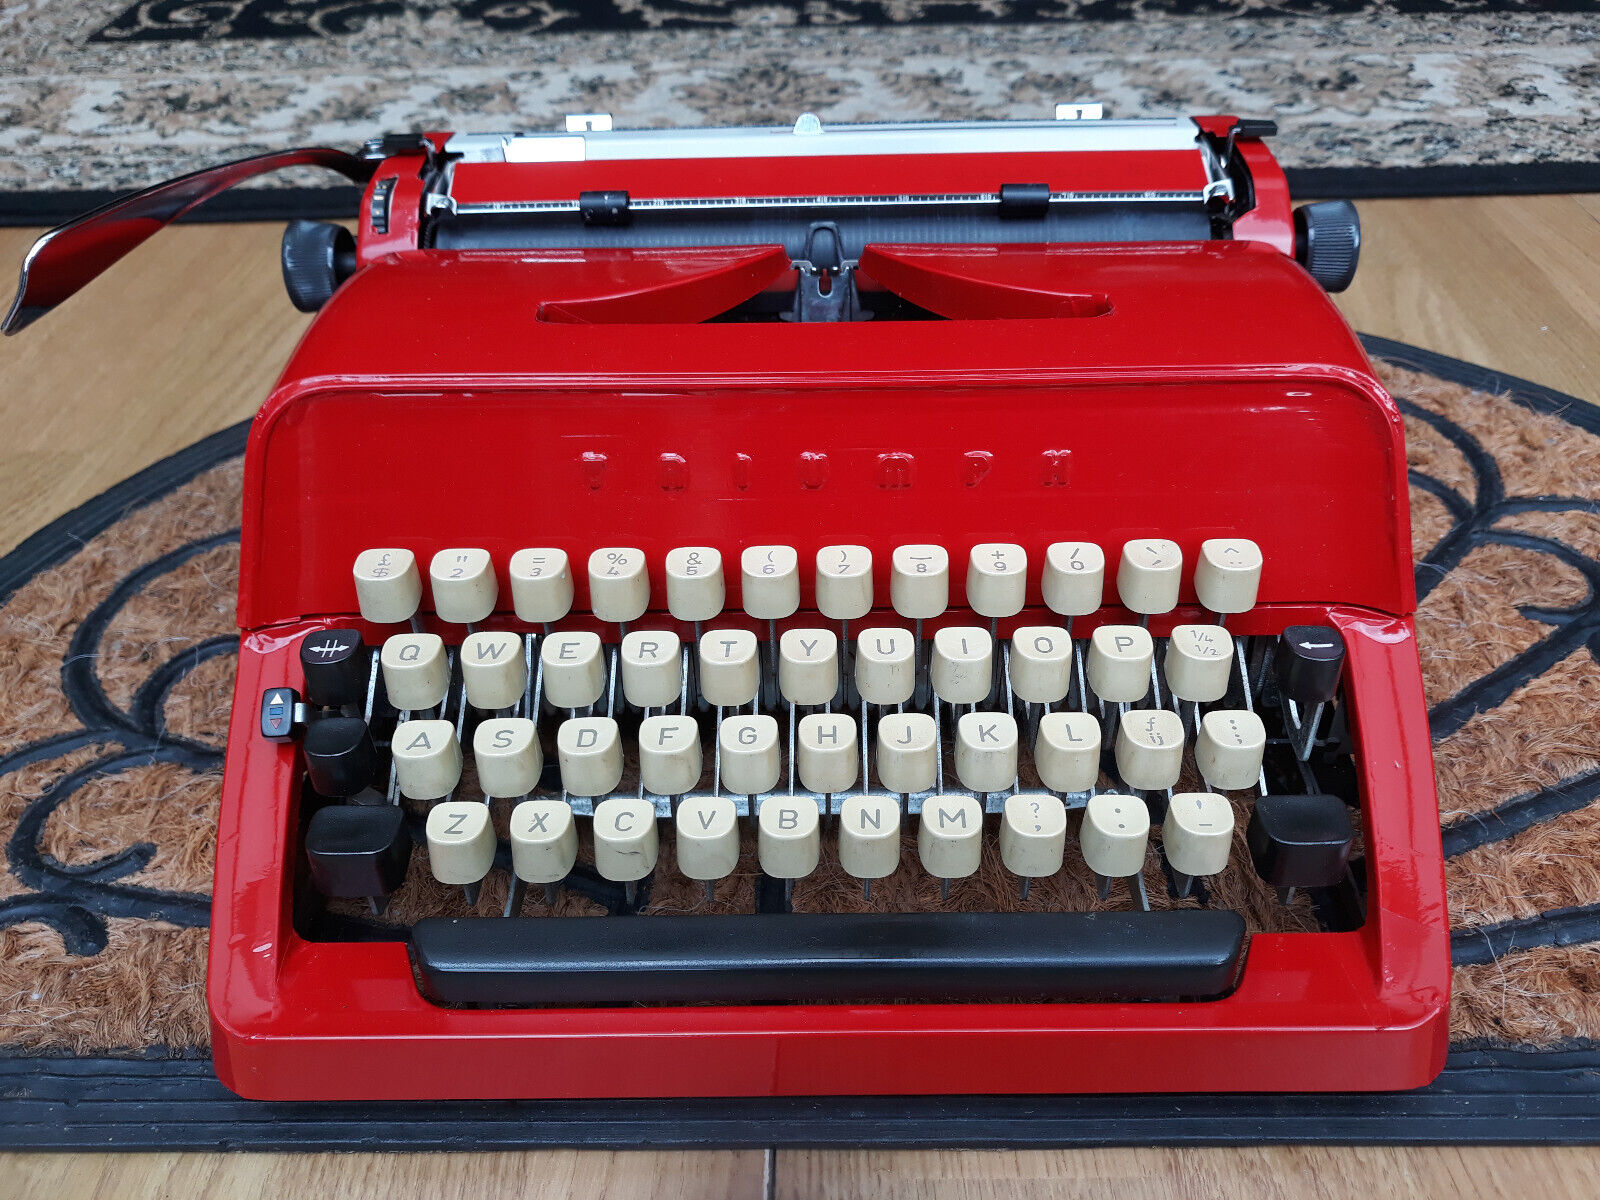 Beautifull red Triumph portable vintage typewriter with case